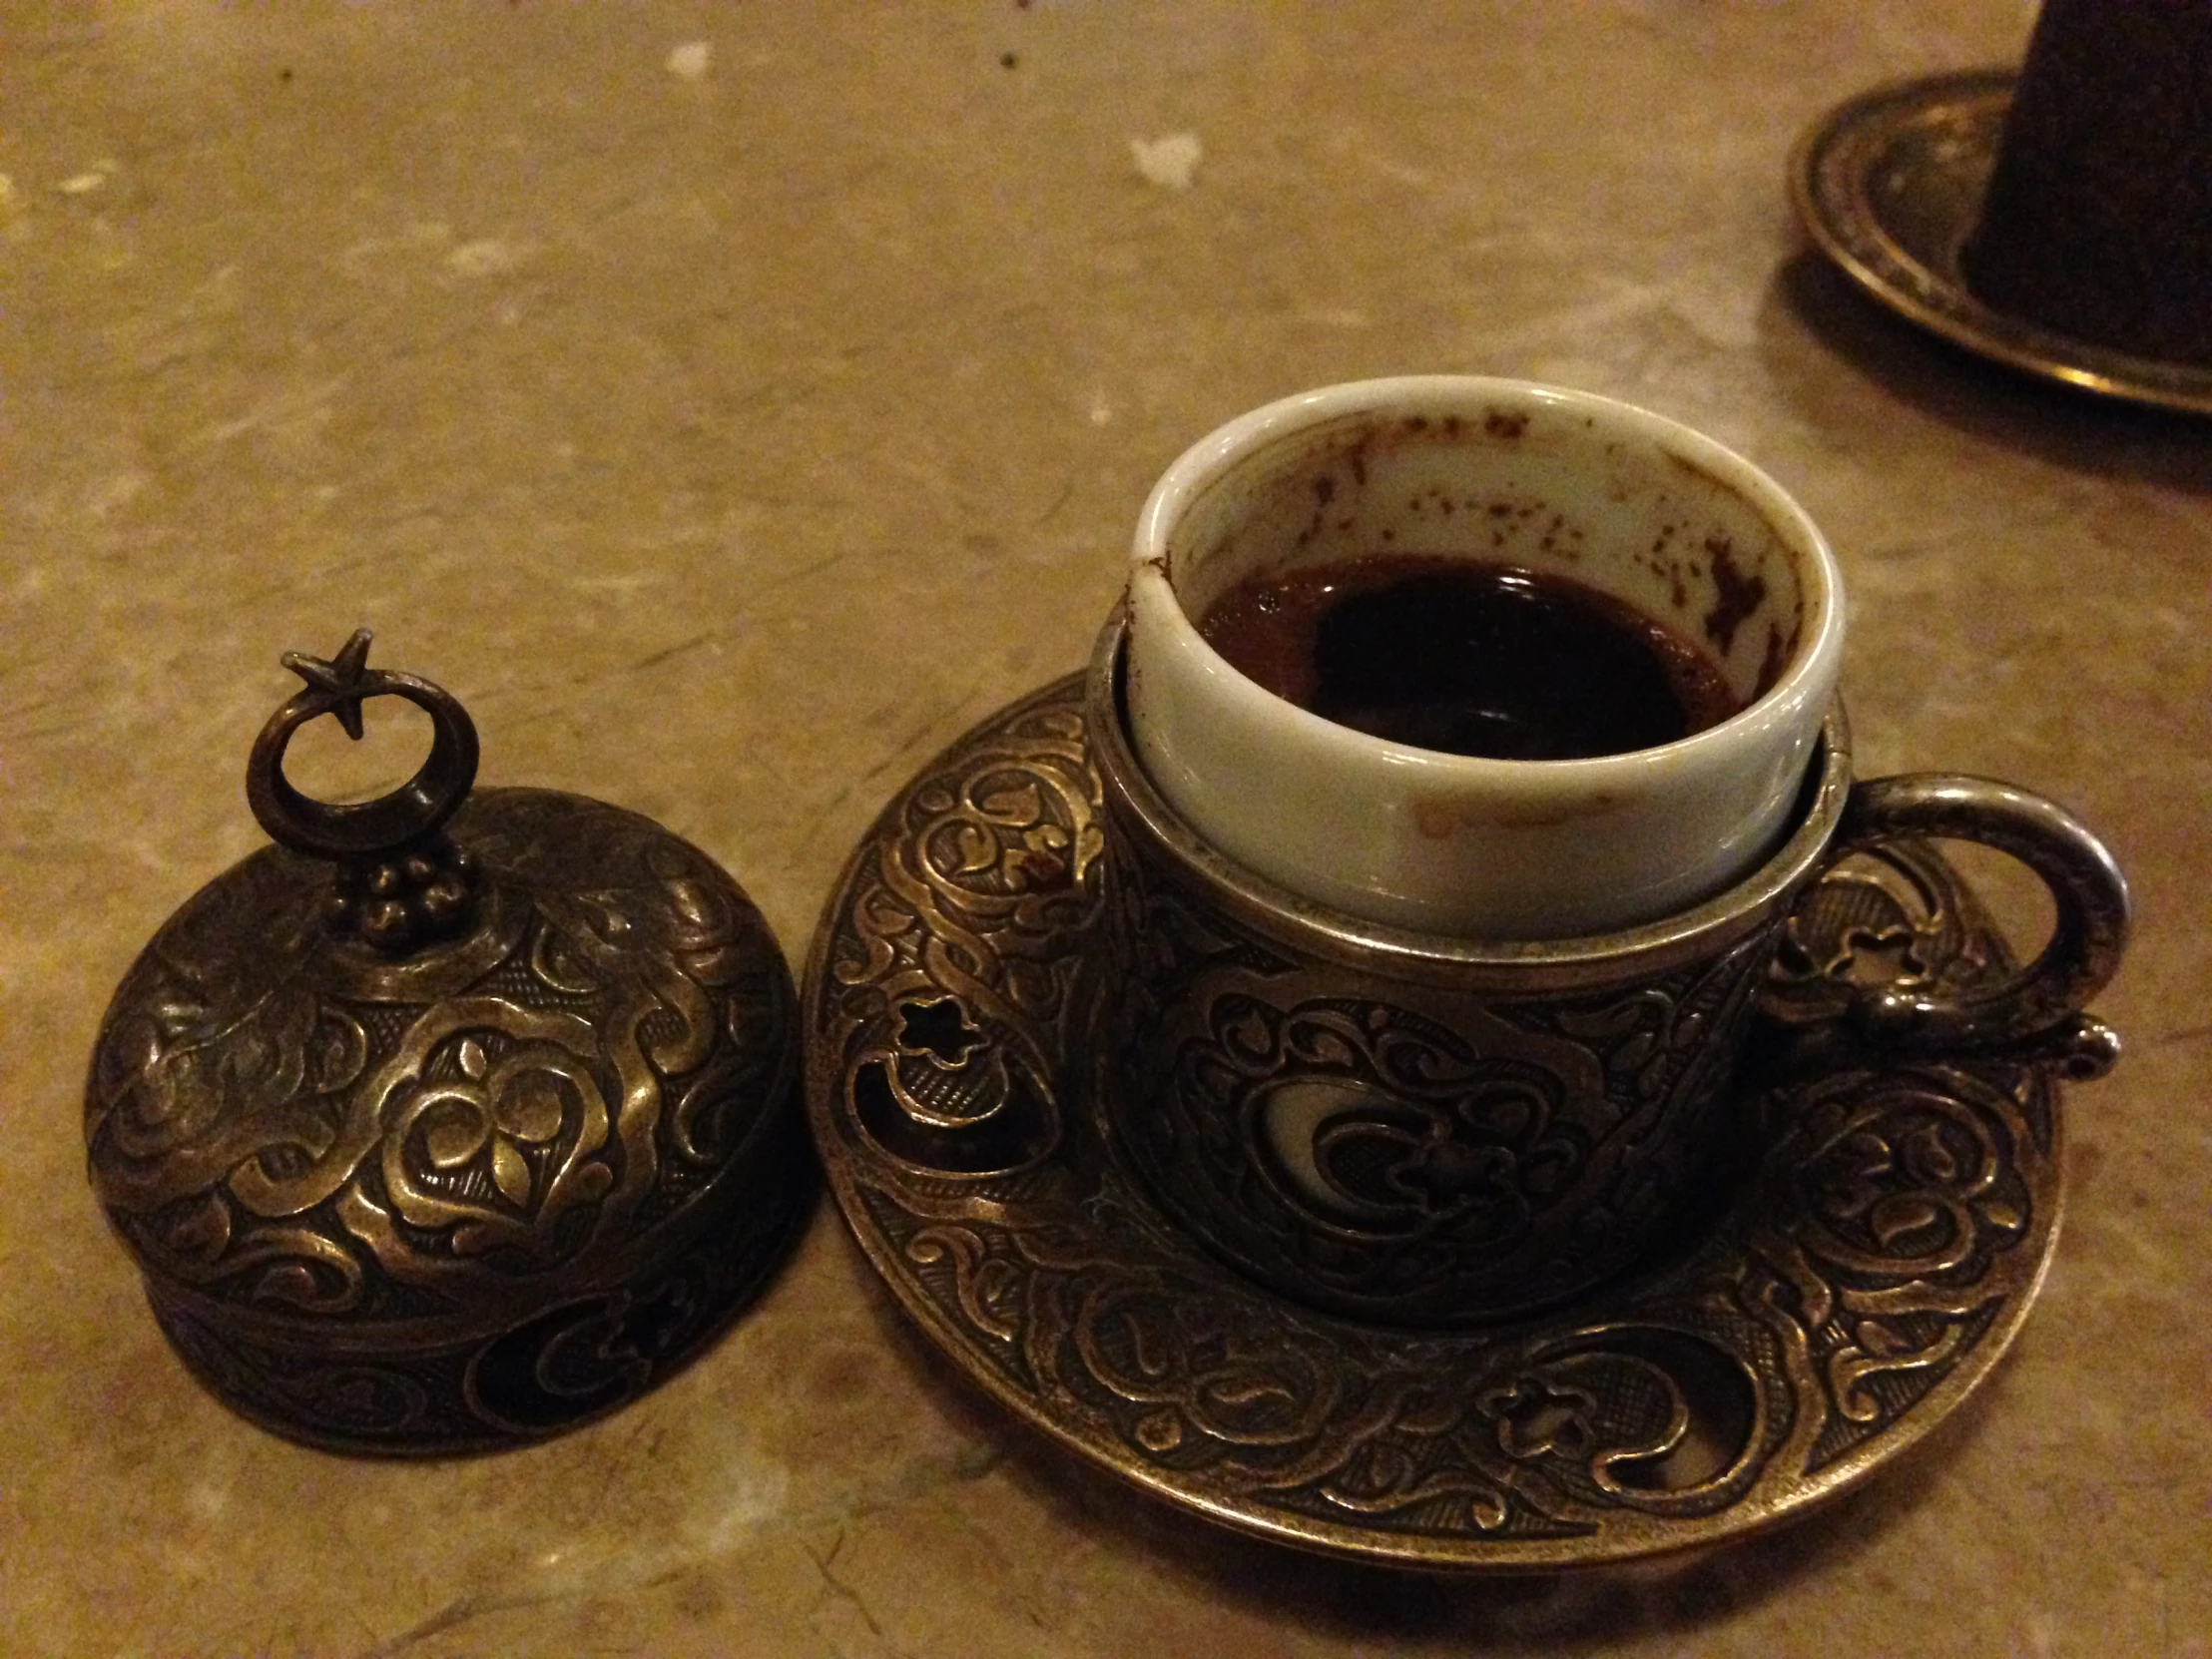 a cup of coffee and an ornate lid on a plate